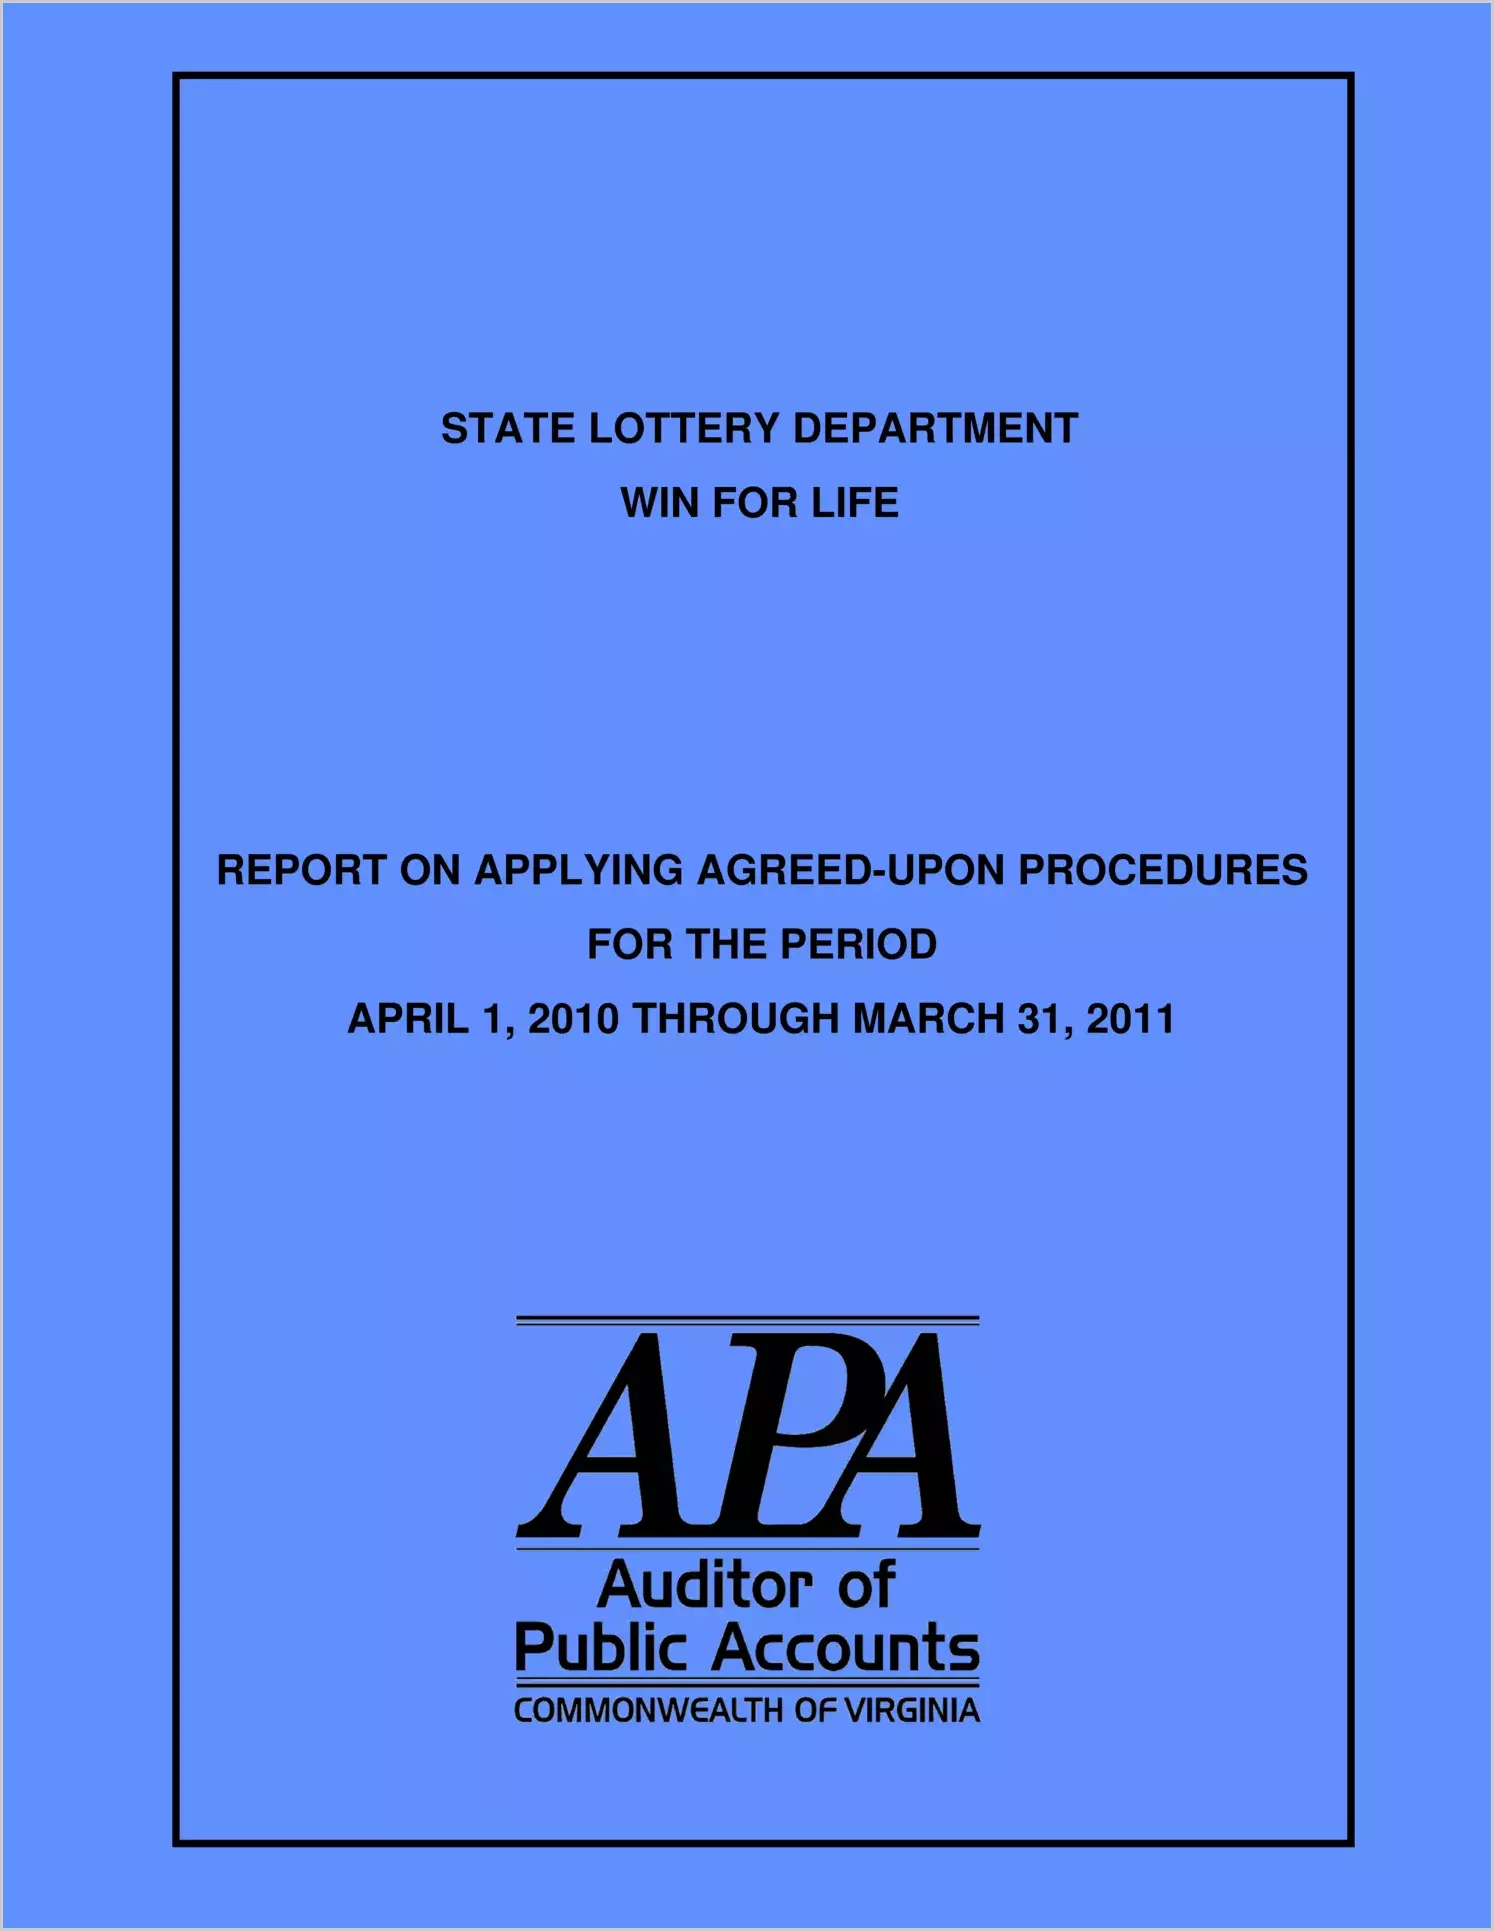 State Lottery Department Win For Life report on Applying Agreed-Upon Procedures for the period for the period April 1, 2010 through March 31, 2011